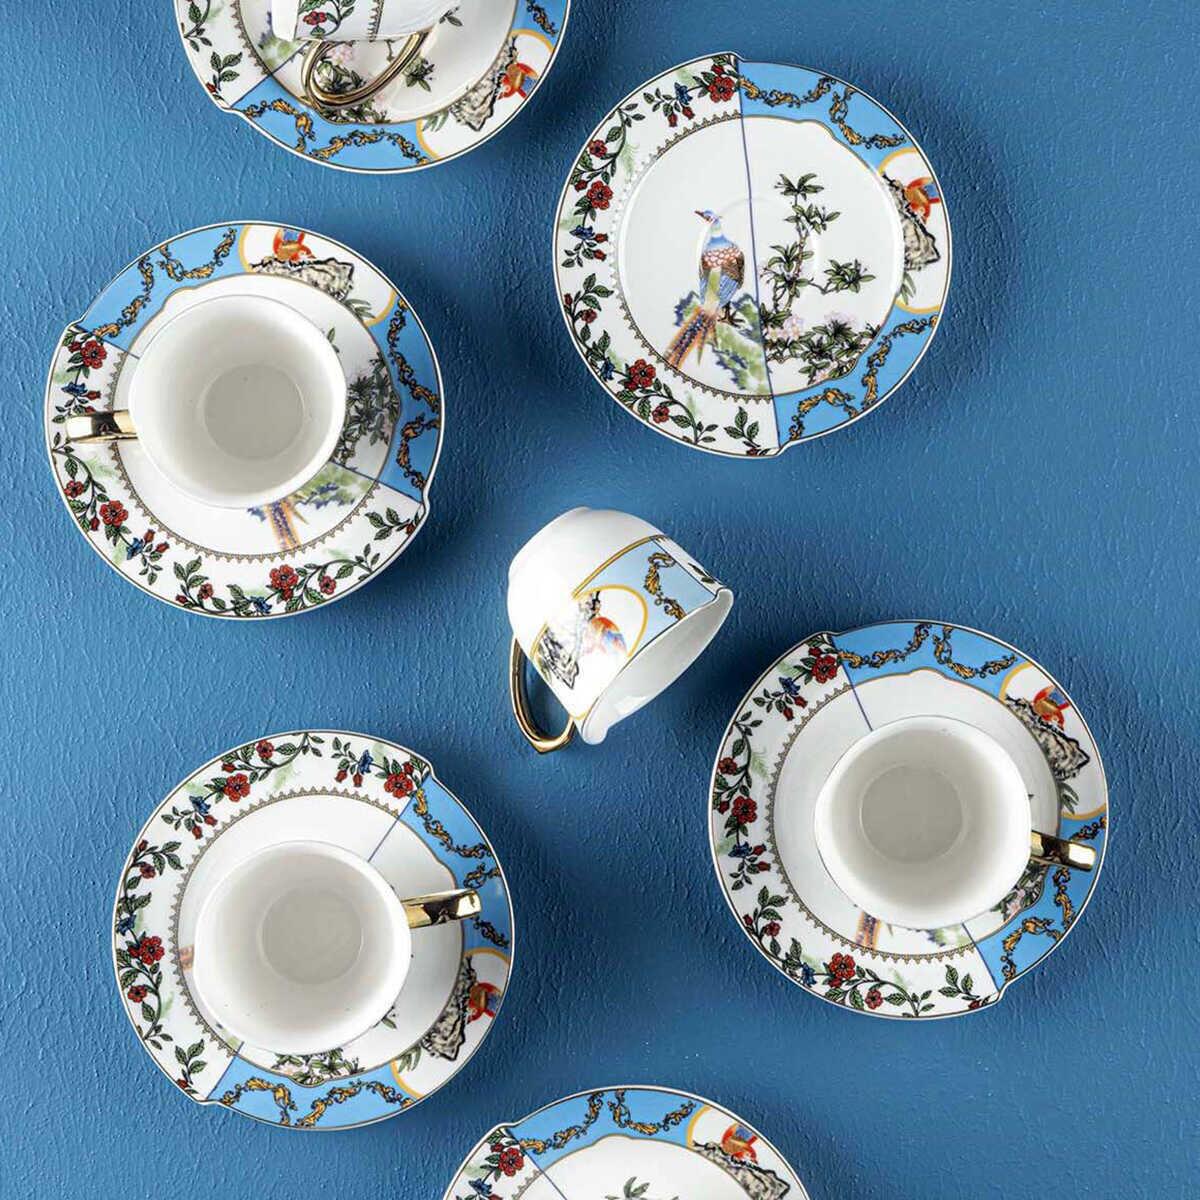 AROW Turkish Coffee Cup Set for 6 Persons